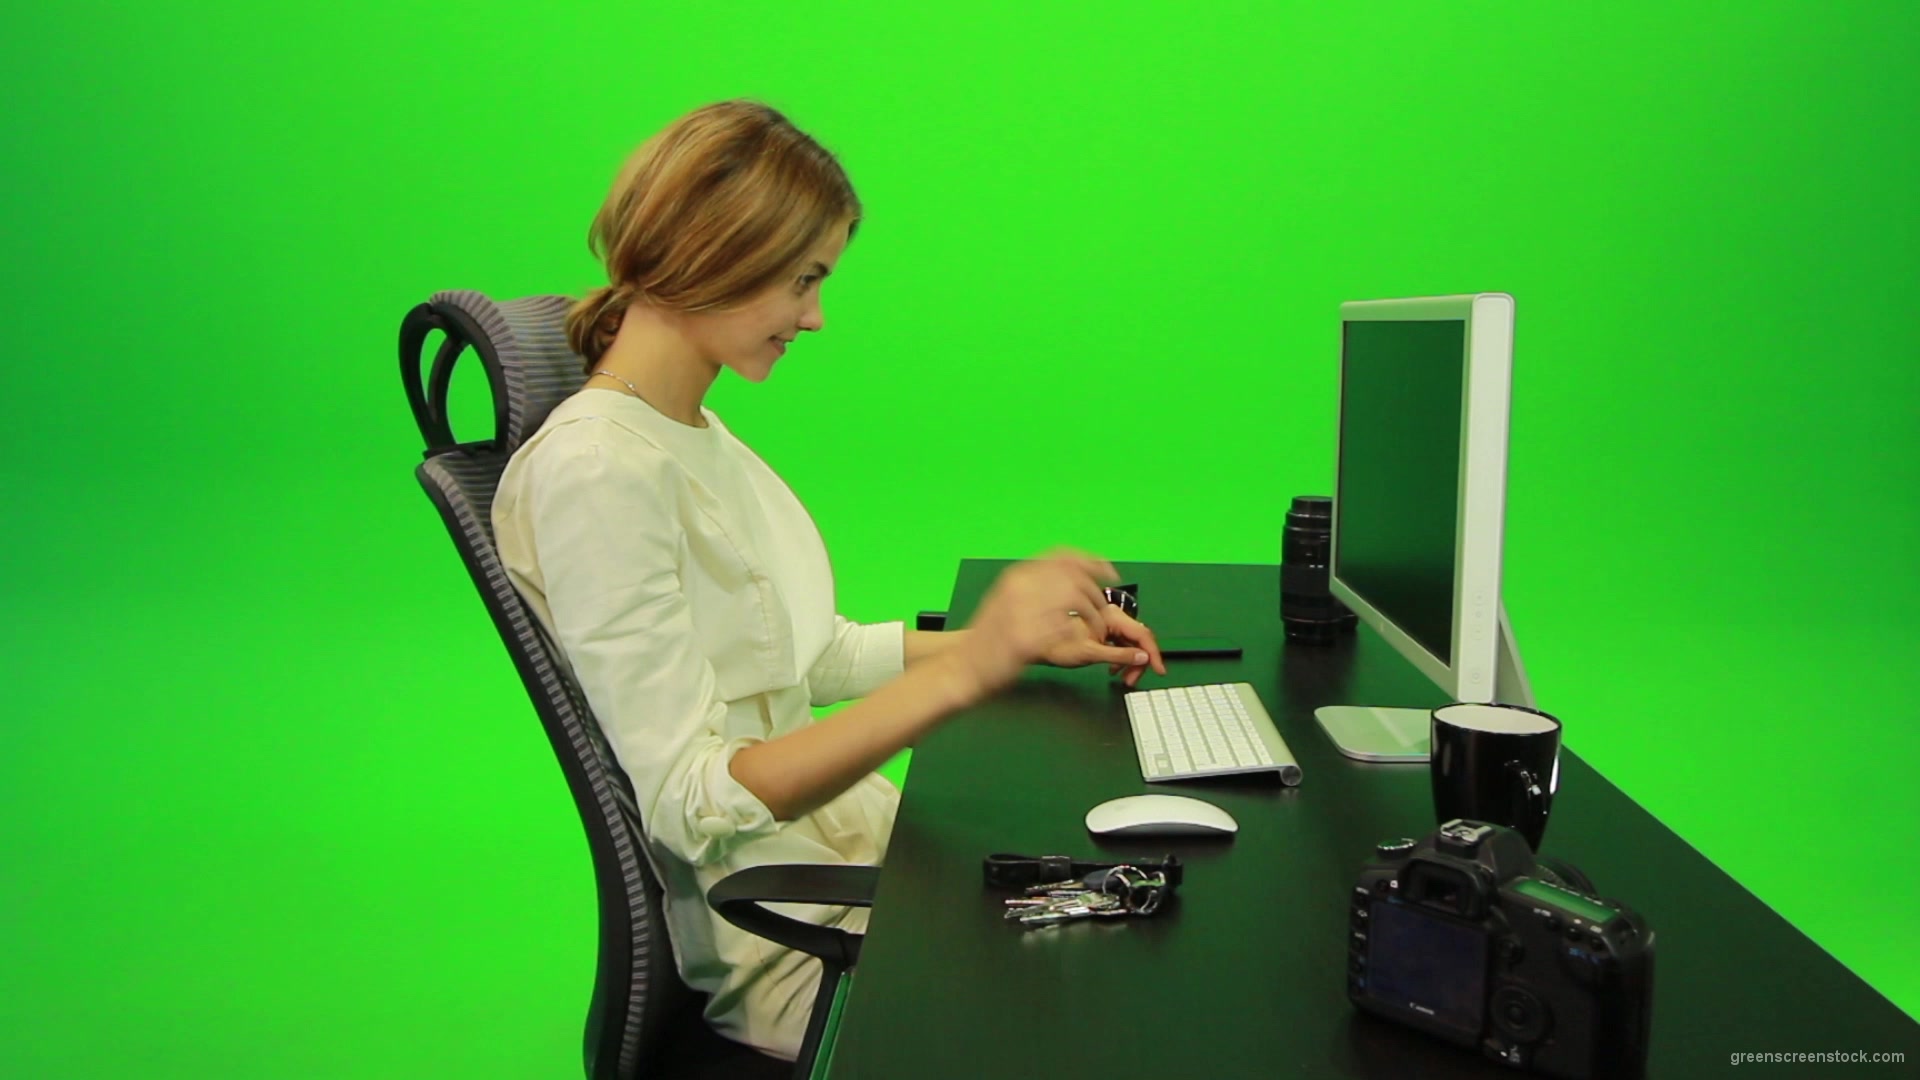 Laughing-Woman-Working-on-the-Computer-Green-Screen-Footage_008 Green Screen Stock